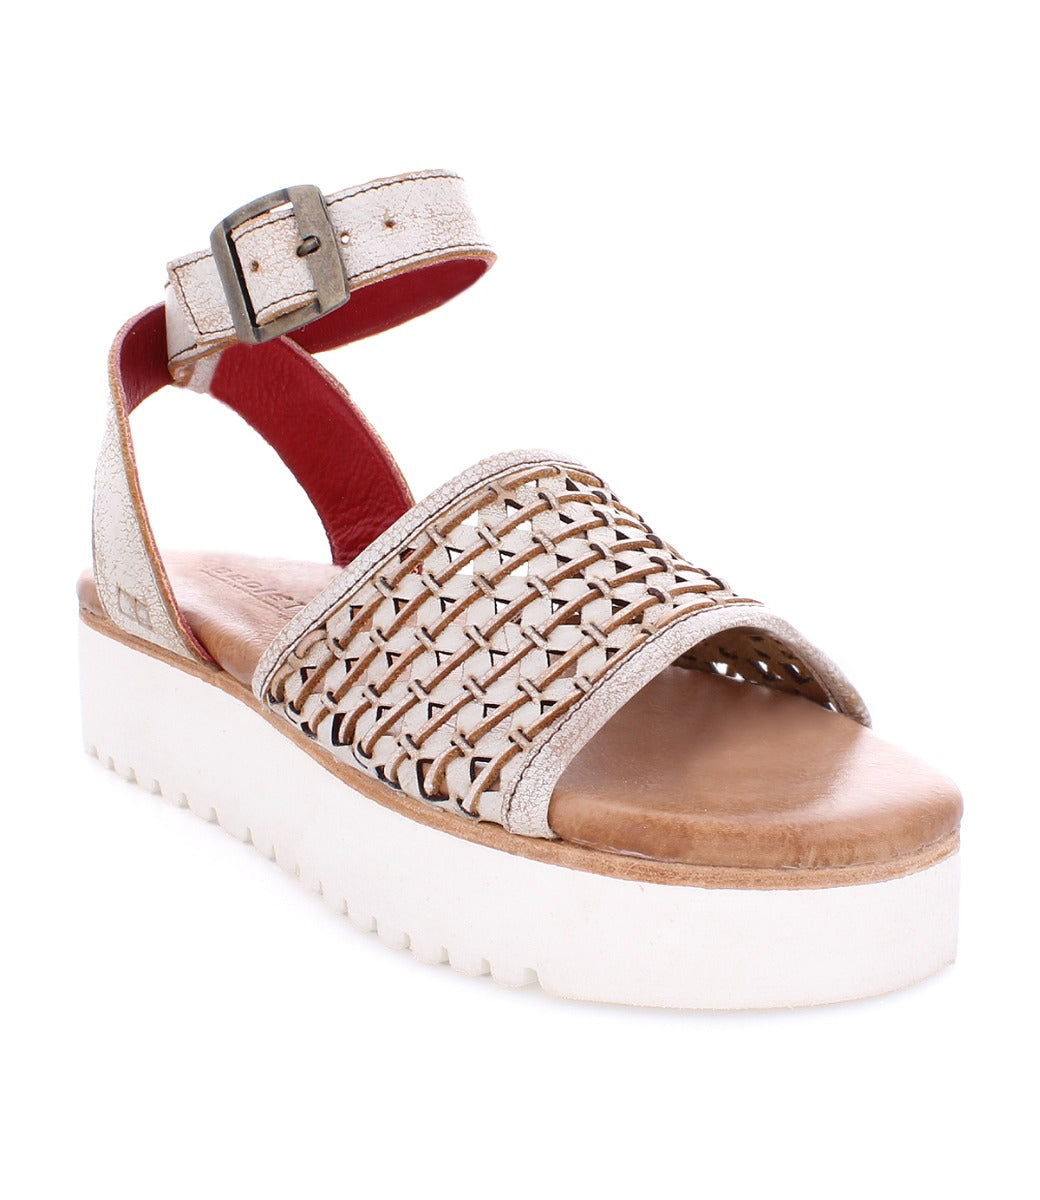 A women's Brisa sandal with braided straps and a white sole by Bed Stu.